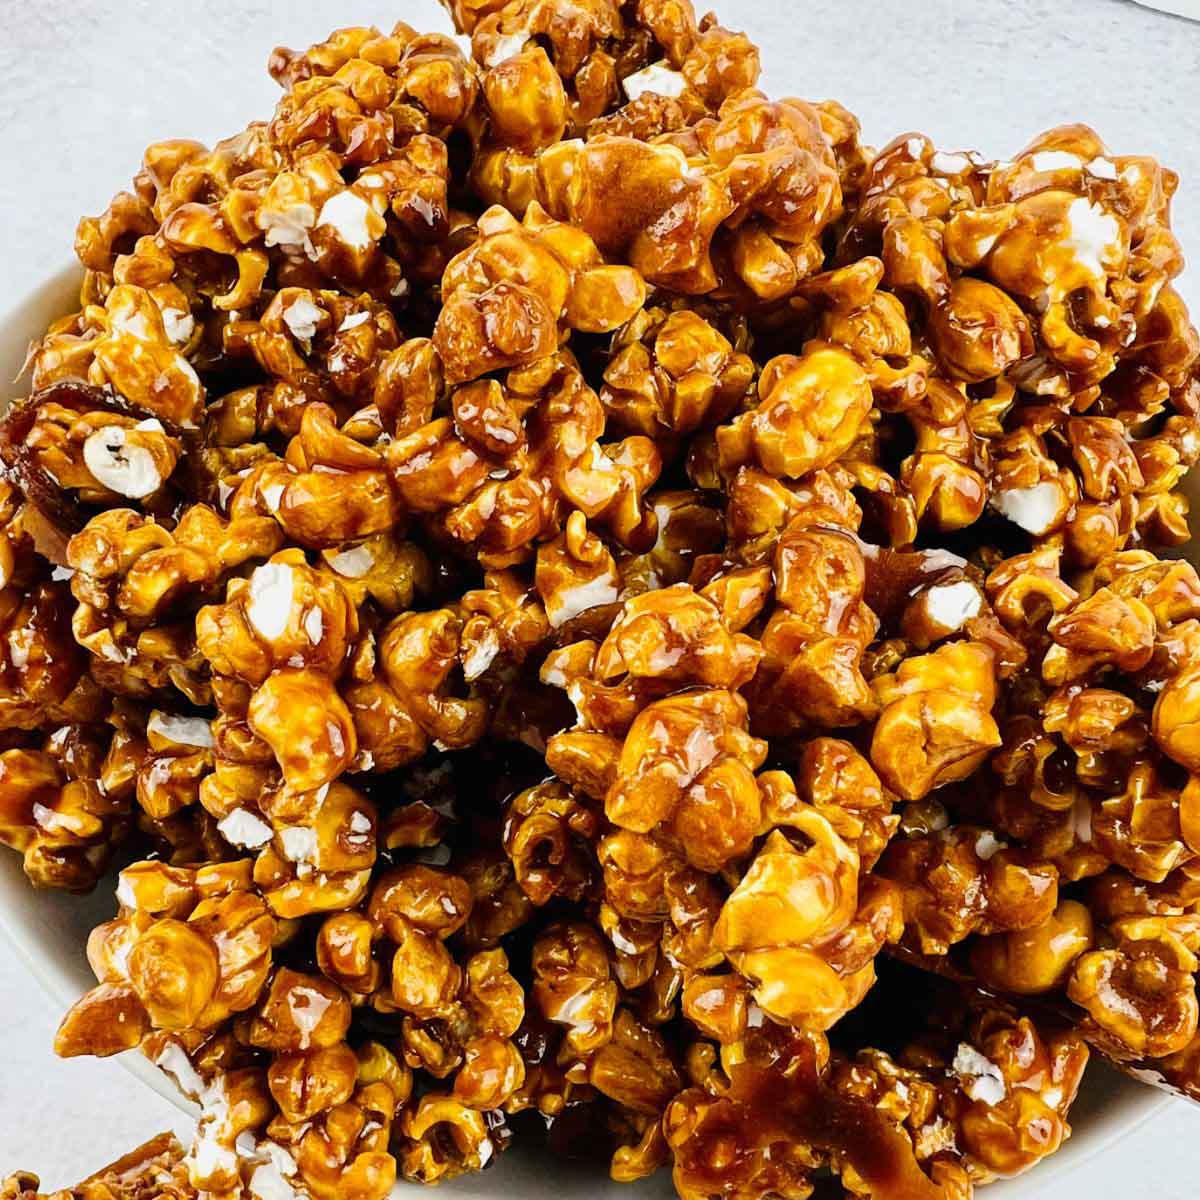 Thumbnail of caramel popcorn without corn syrup.